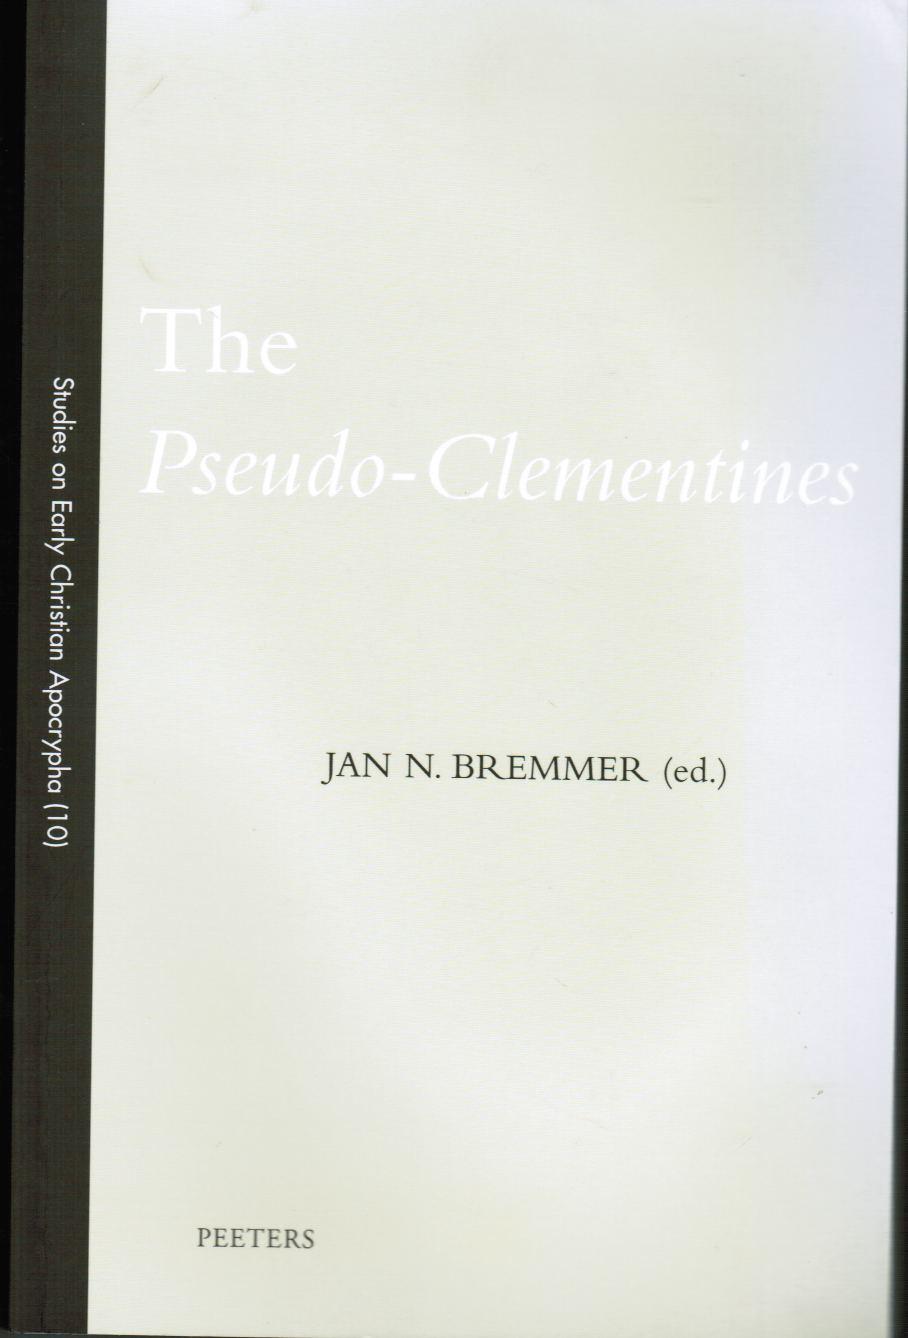 The Pseudo-Clementines (Studies on Early Christian Apocrypha) - Bremmer, Jan N. (editor)